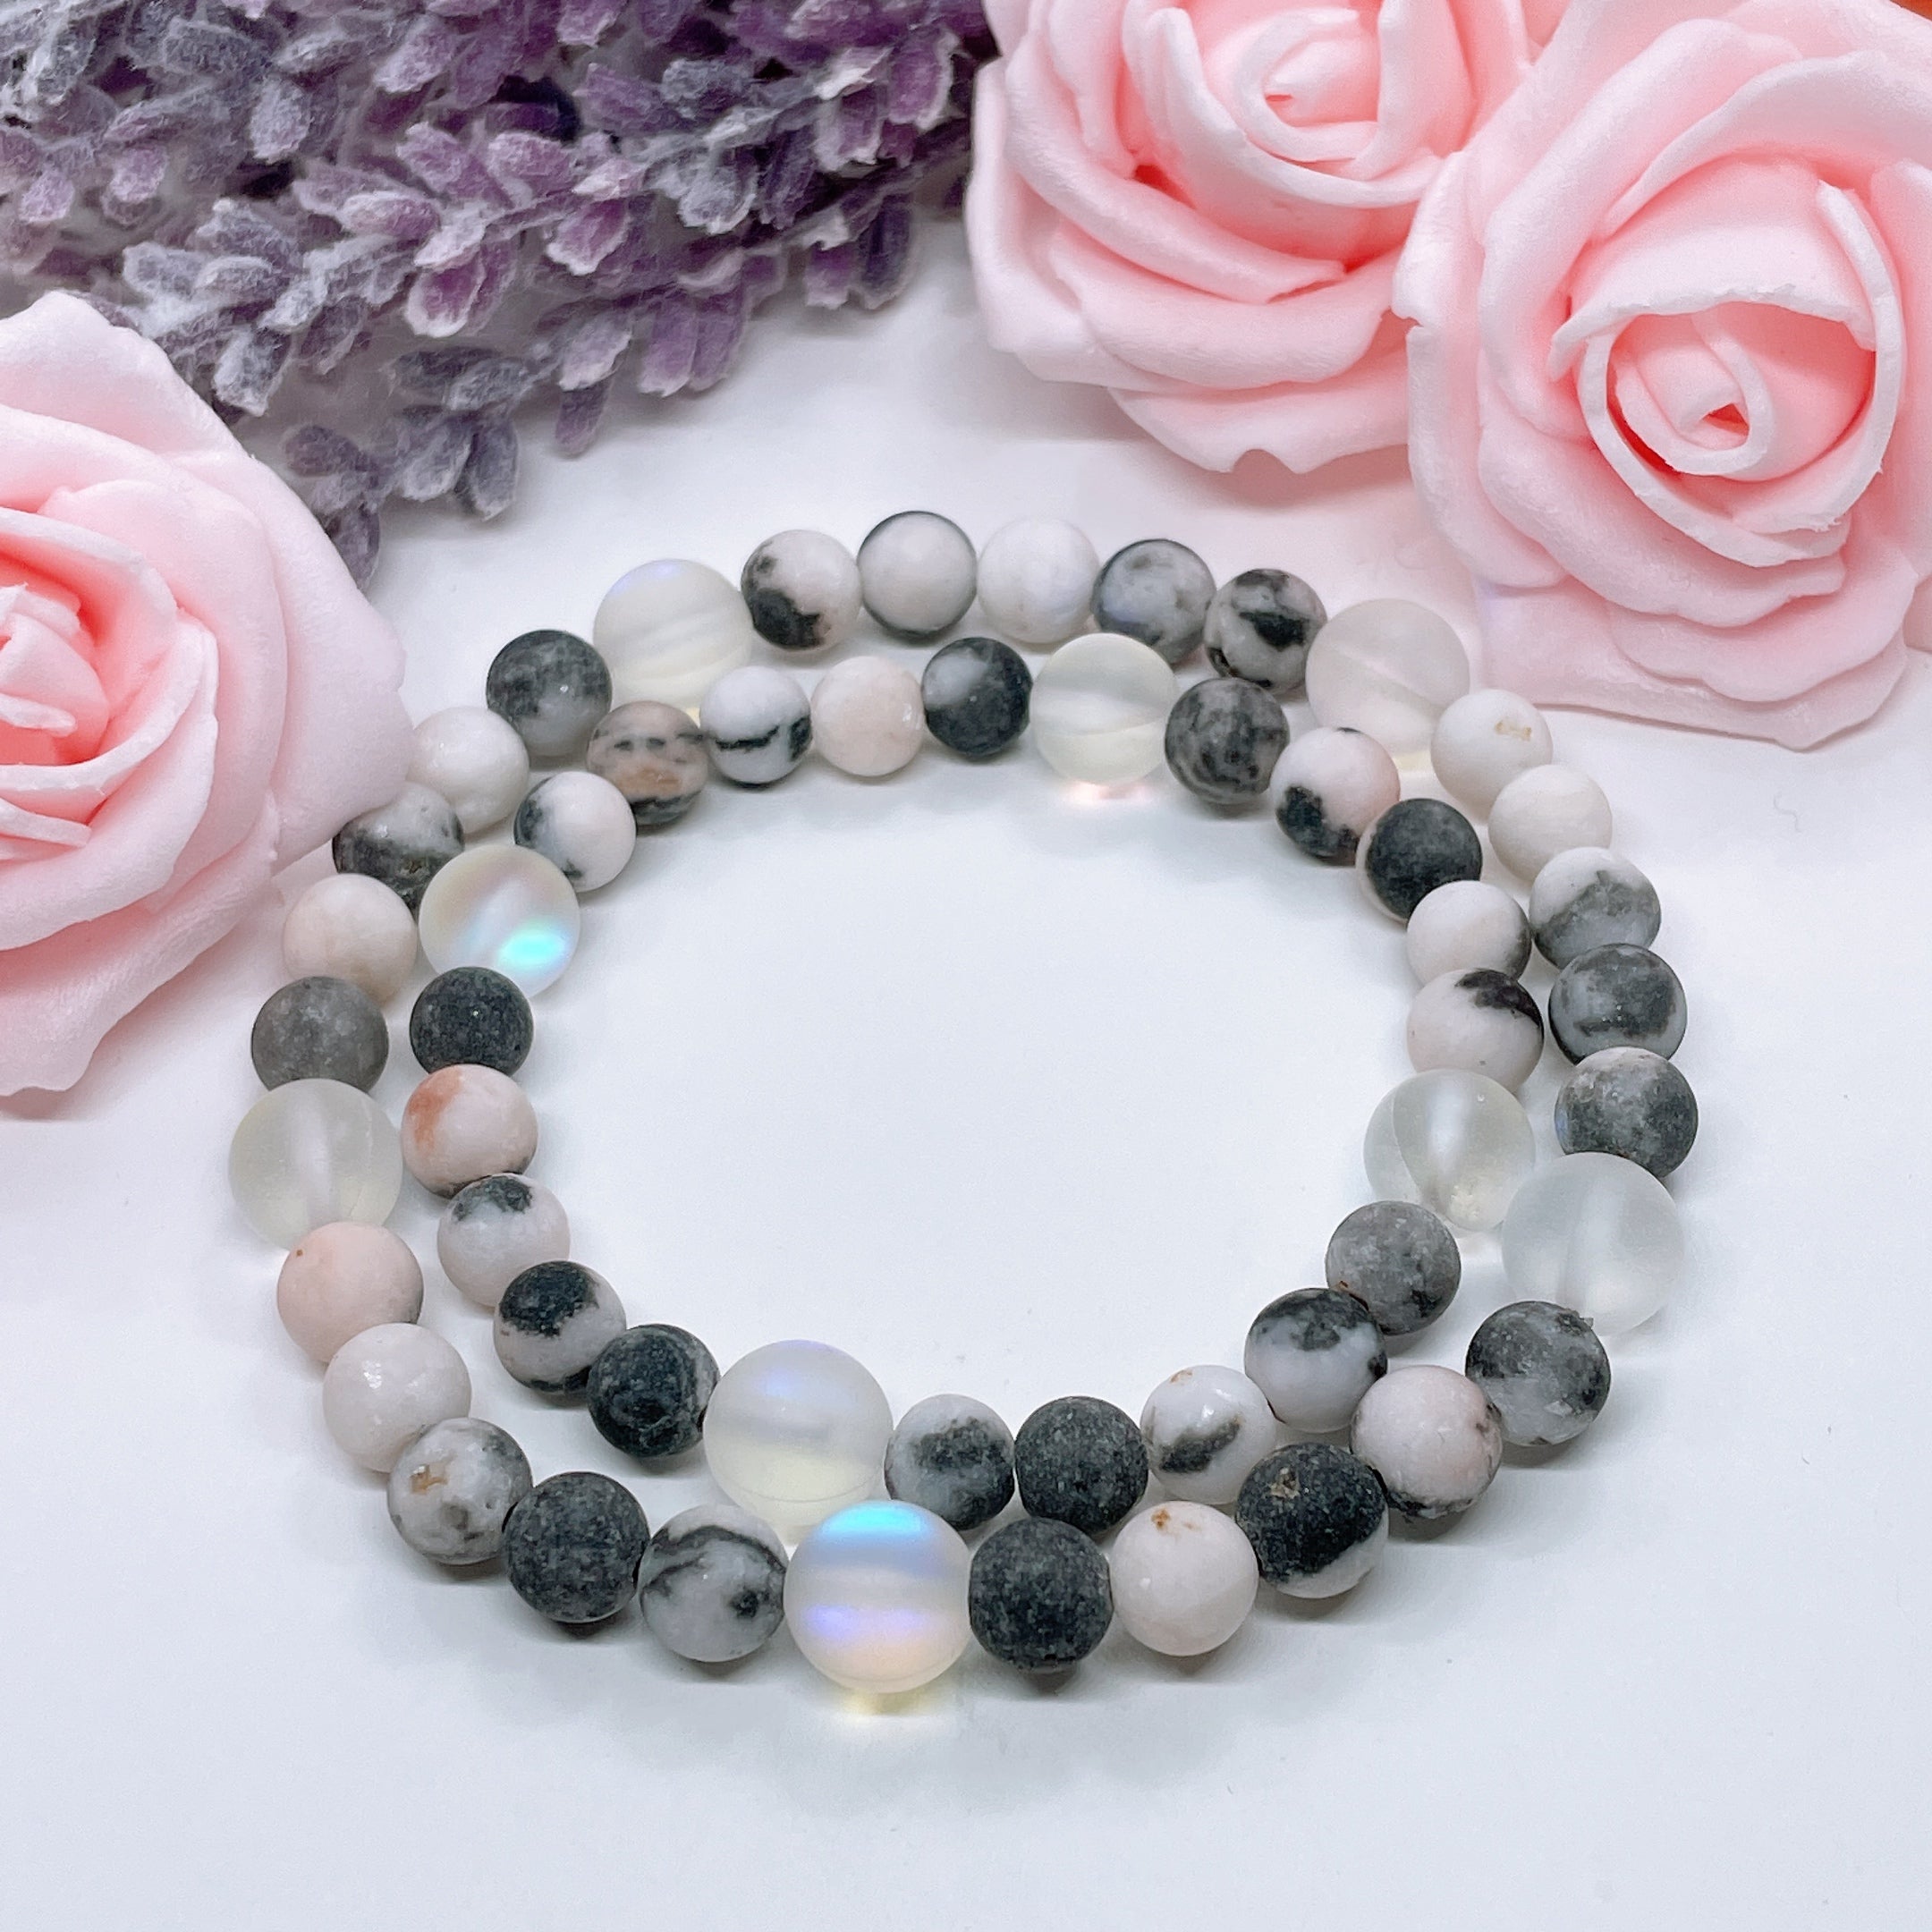 The 5 Second Rule Companion gemstone stretch bracelet made with pink zebra jasper beads and translucent aura beads sits on a white table. Natural neutral colors.